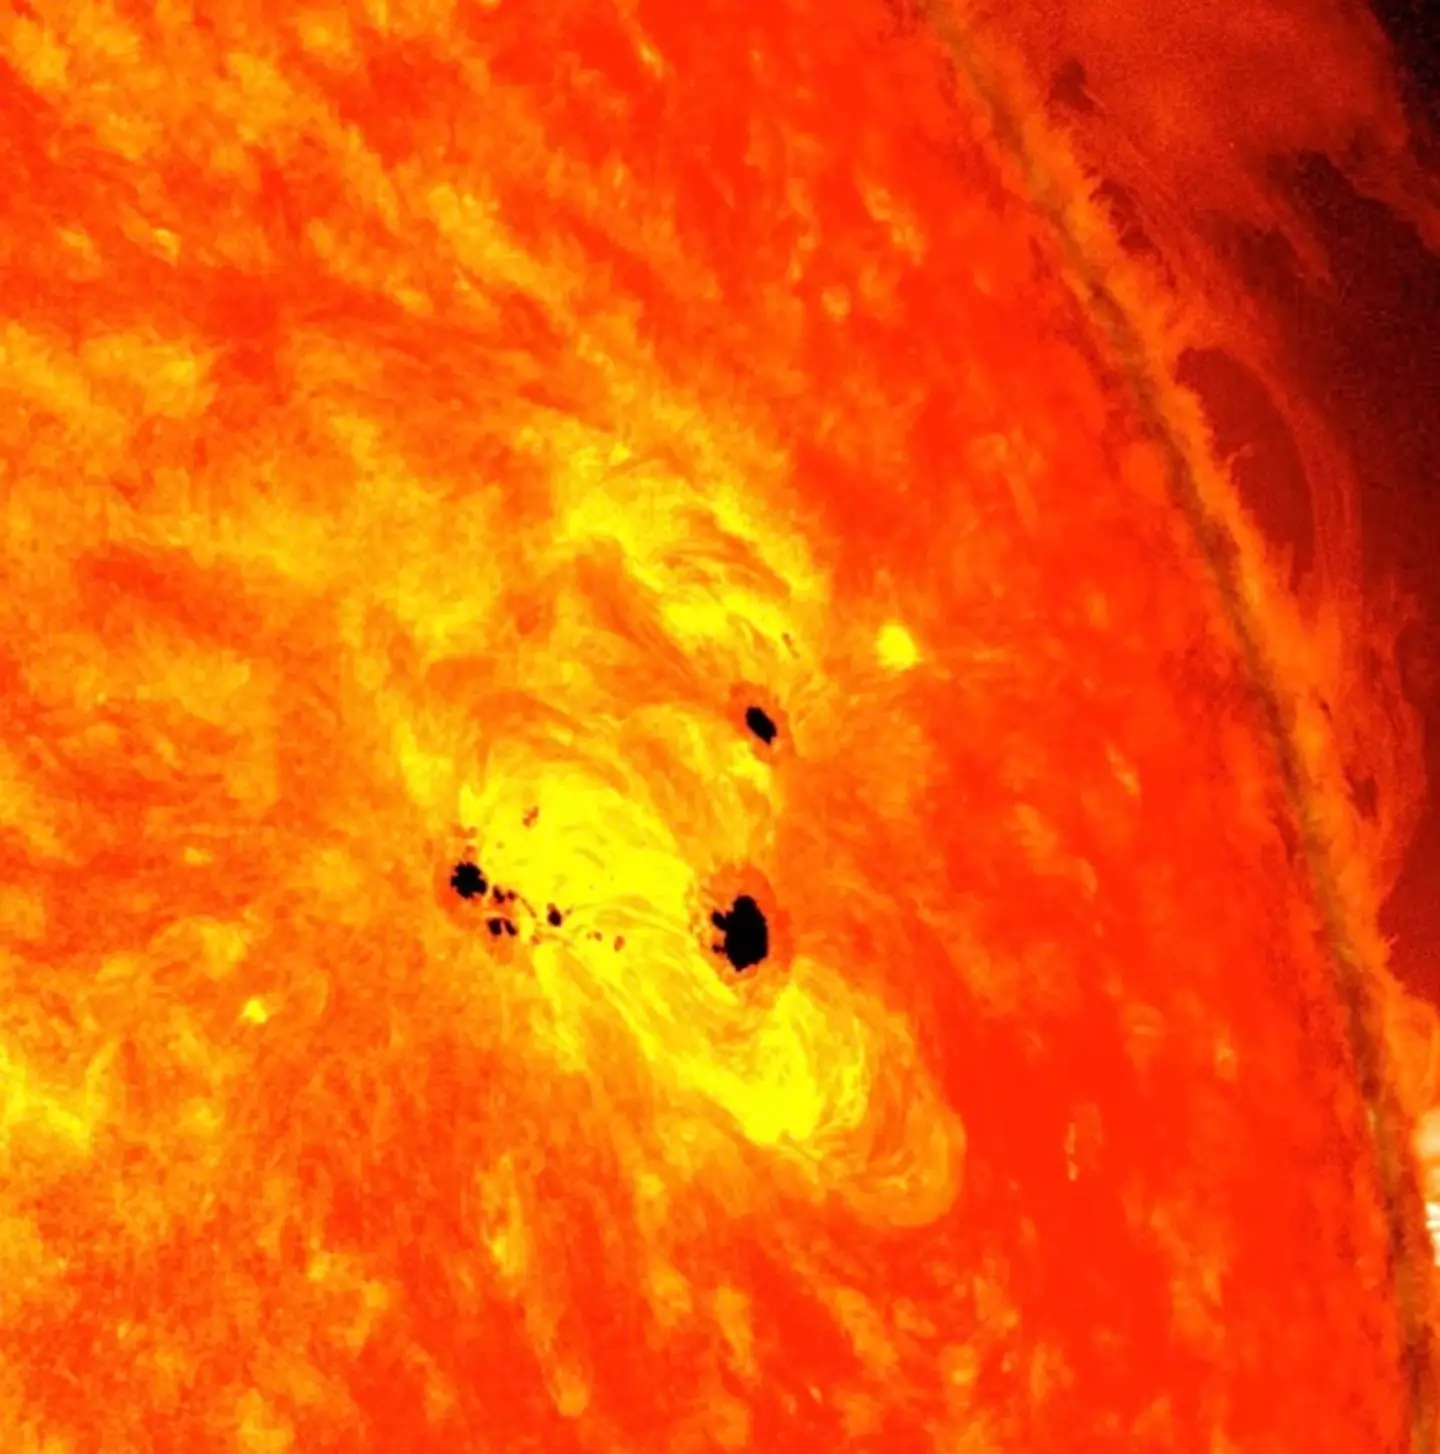 Sun spots can sometimes throw out solar flares.